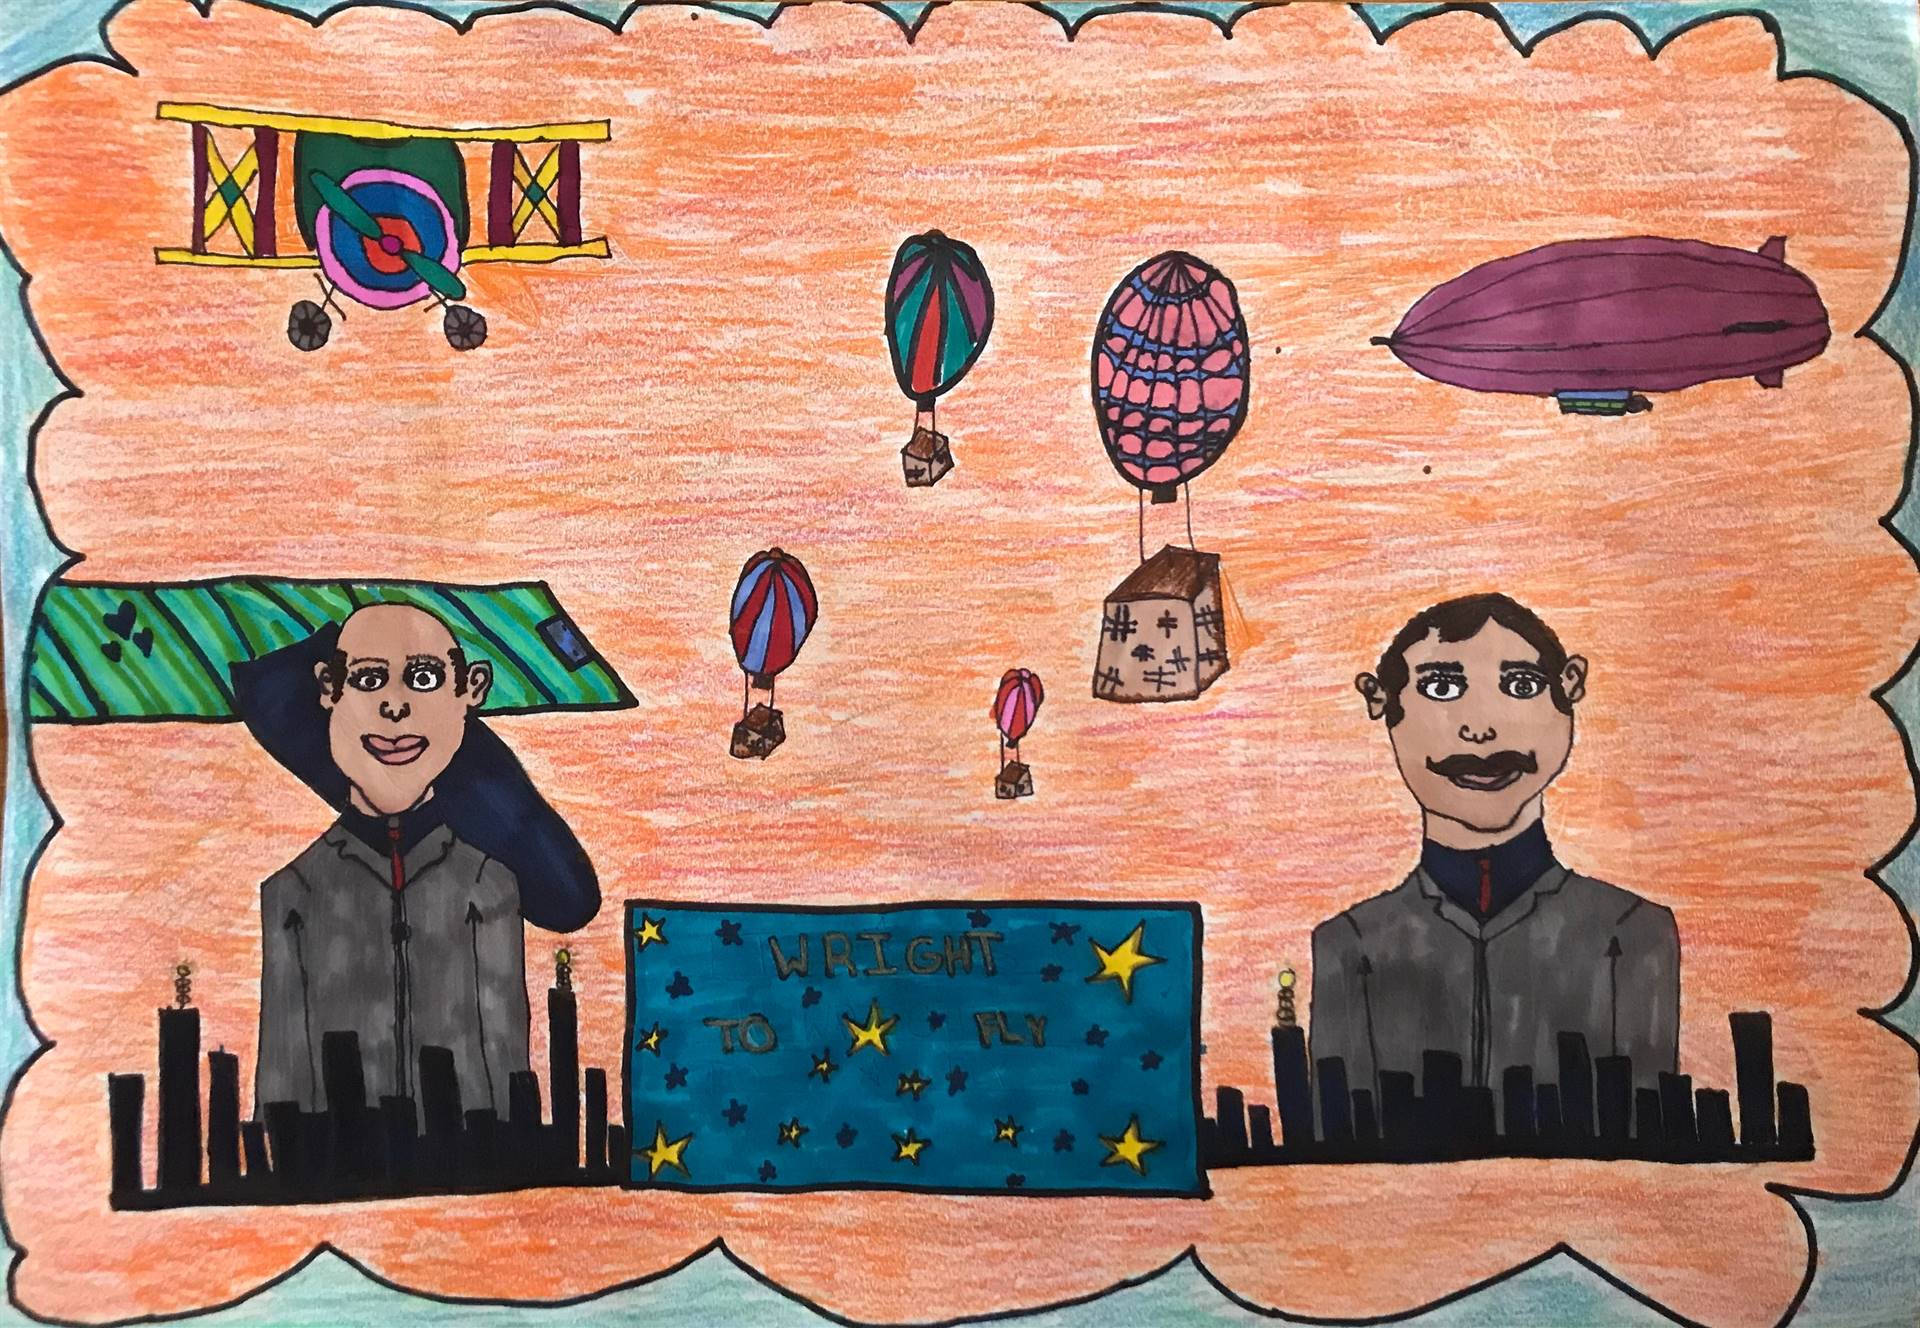 Student art displaying people, hot air balloons and zeppelin.